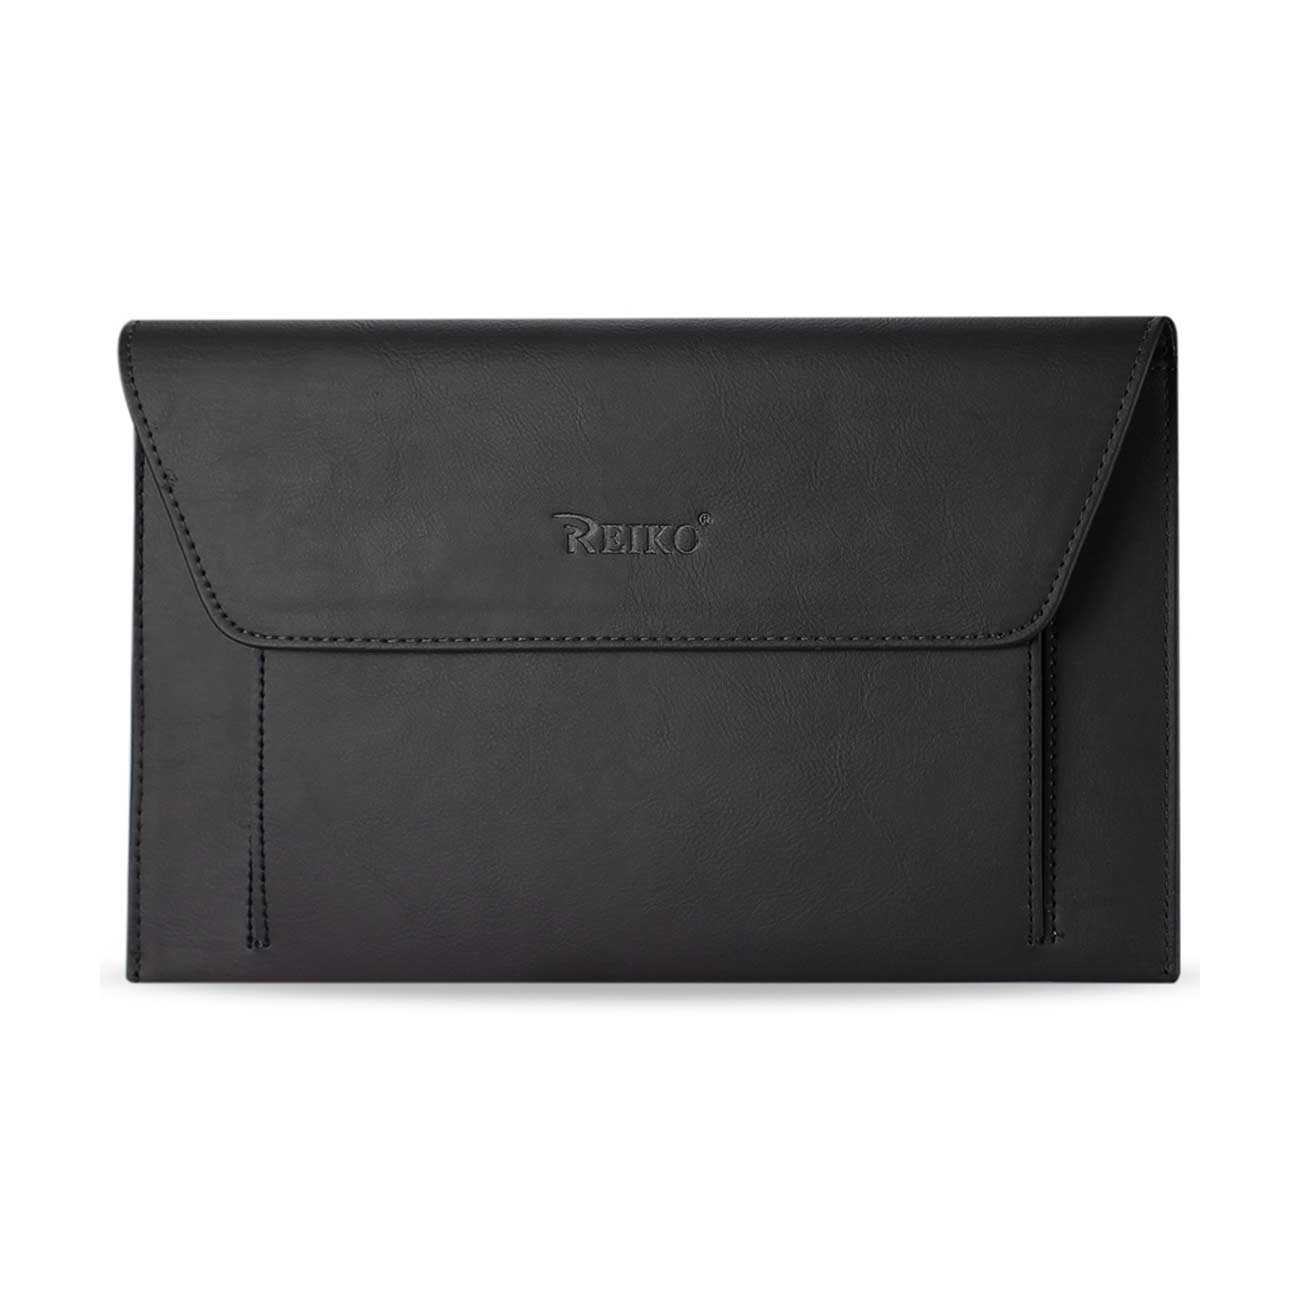 REIKO PREMIUM LEATHER CASE POUCH FOR 11.6INCHES IPADS AND TABLETS In BLACK